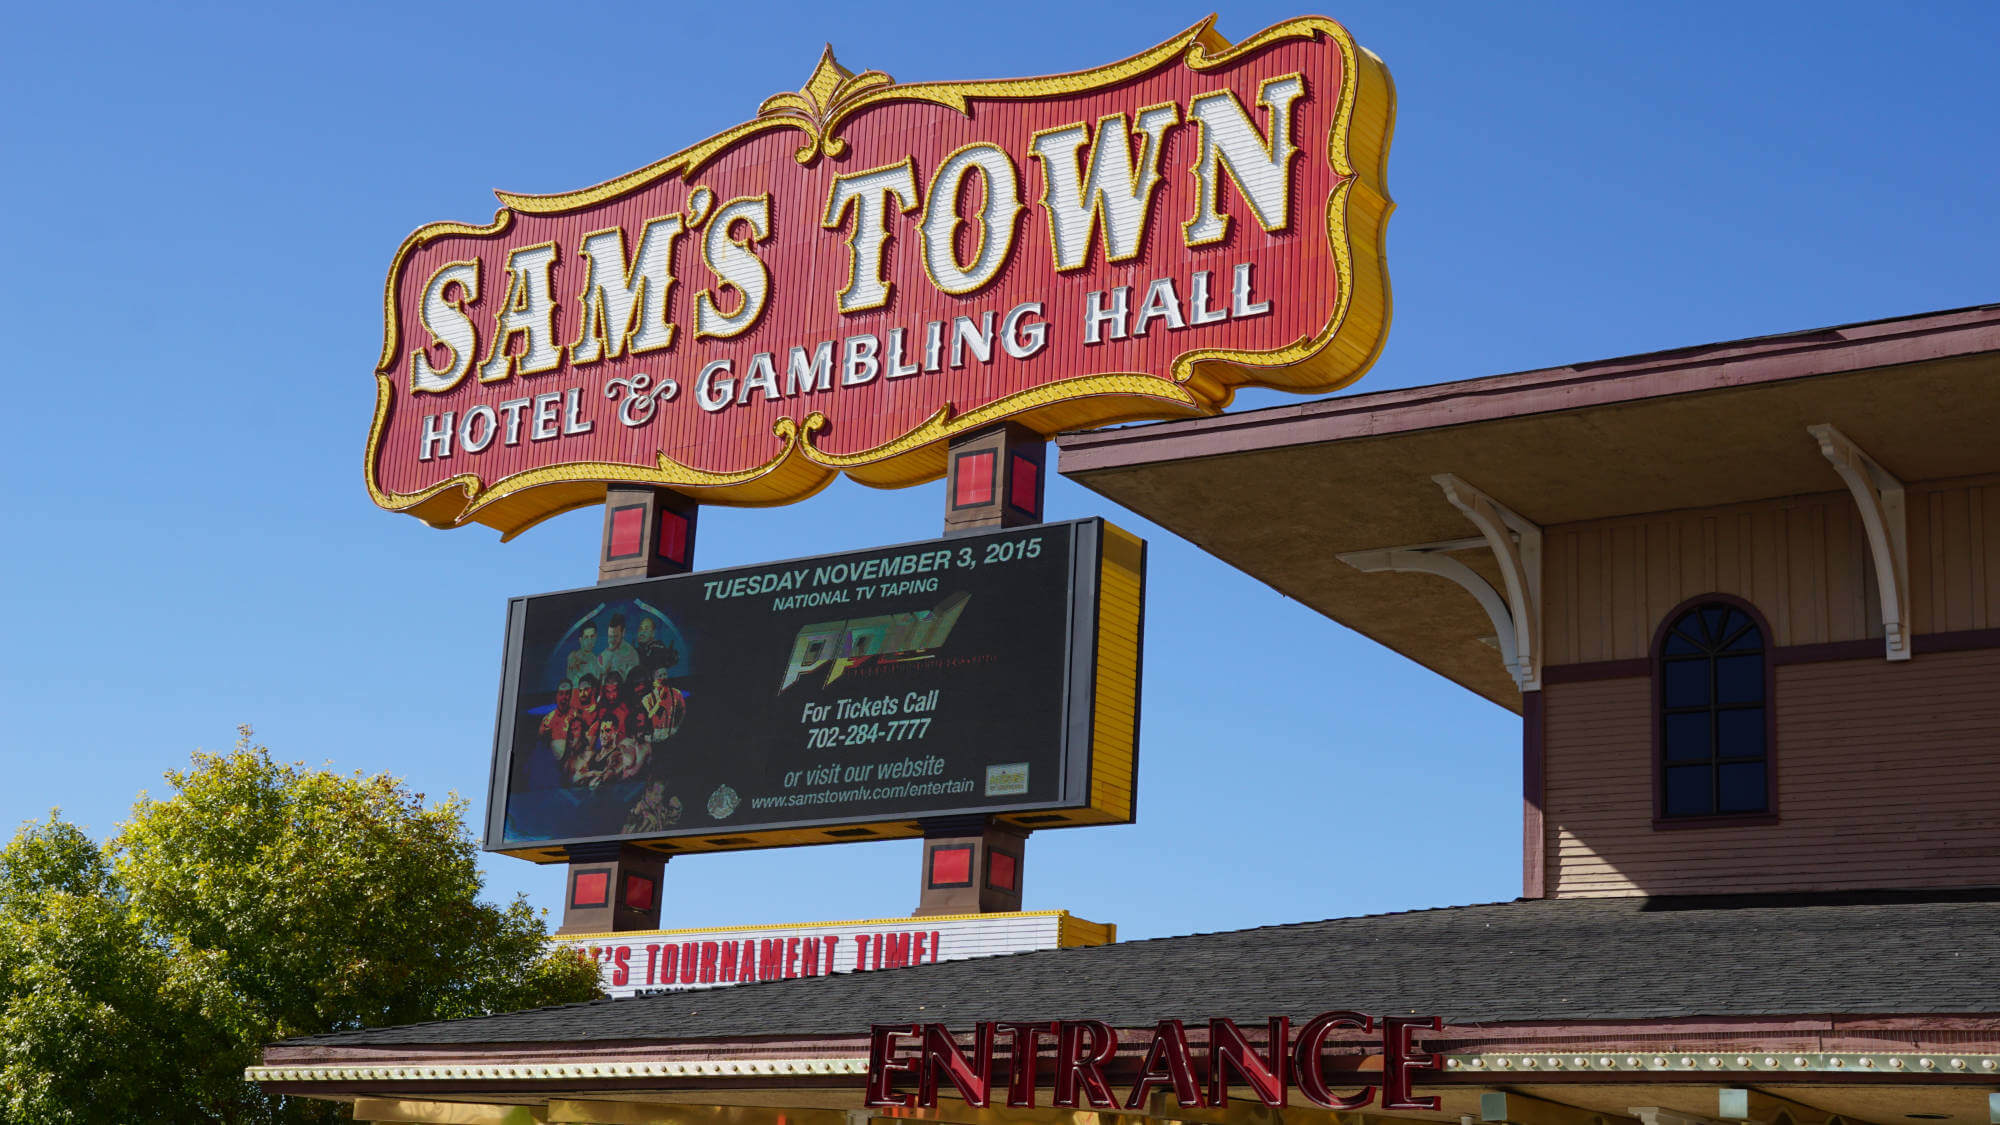 Sam's Town Hotel and Gambling Hall in Las Vegas